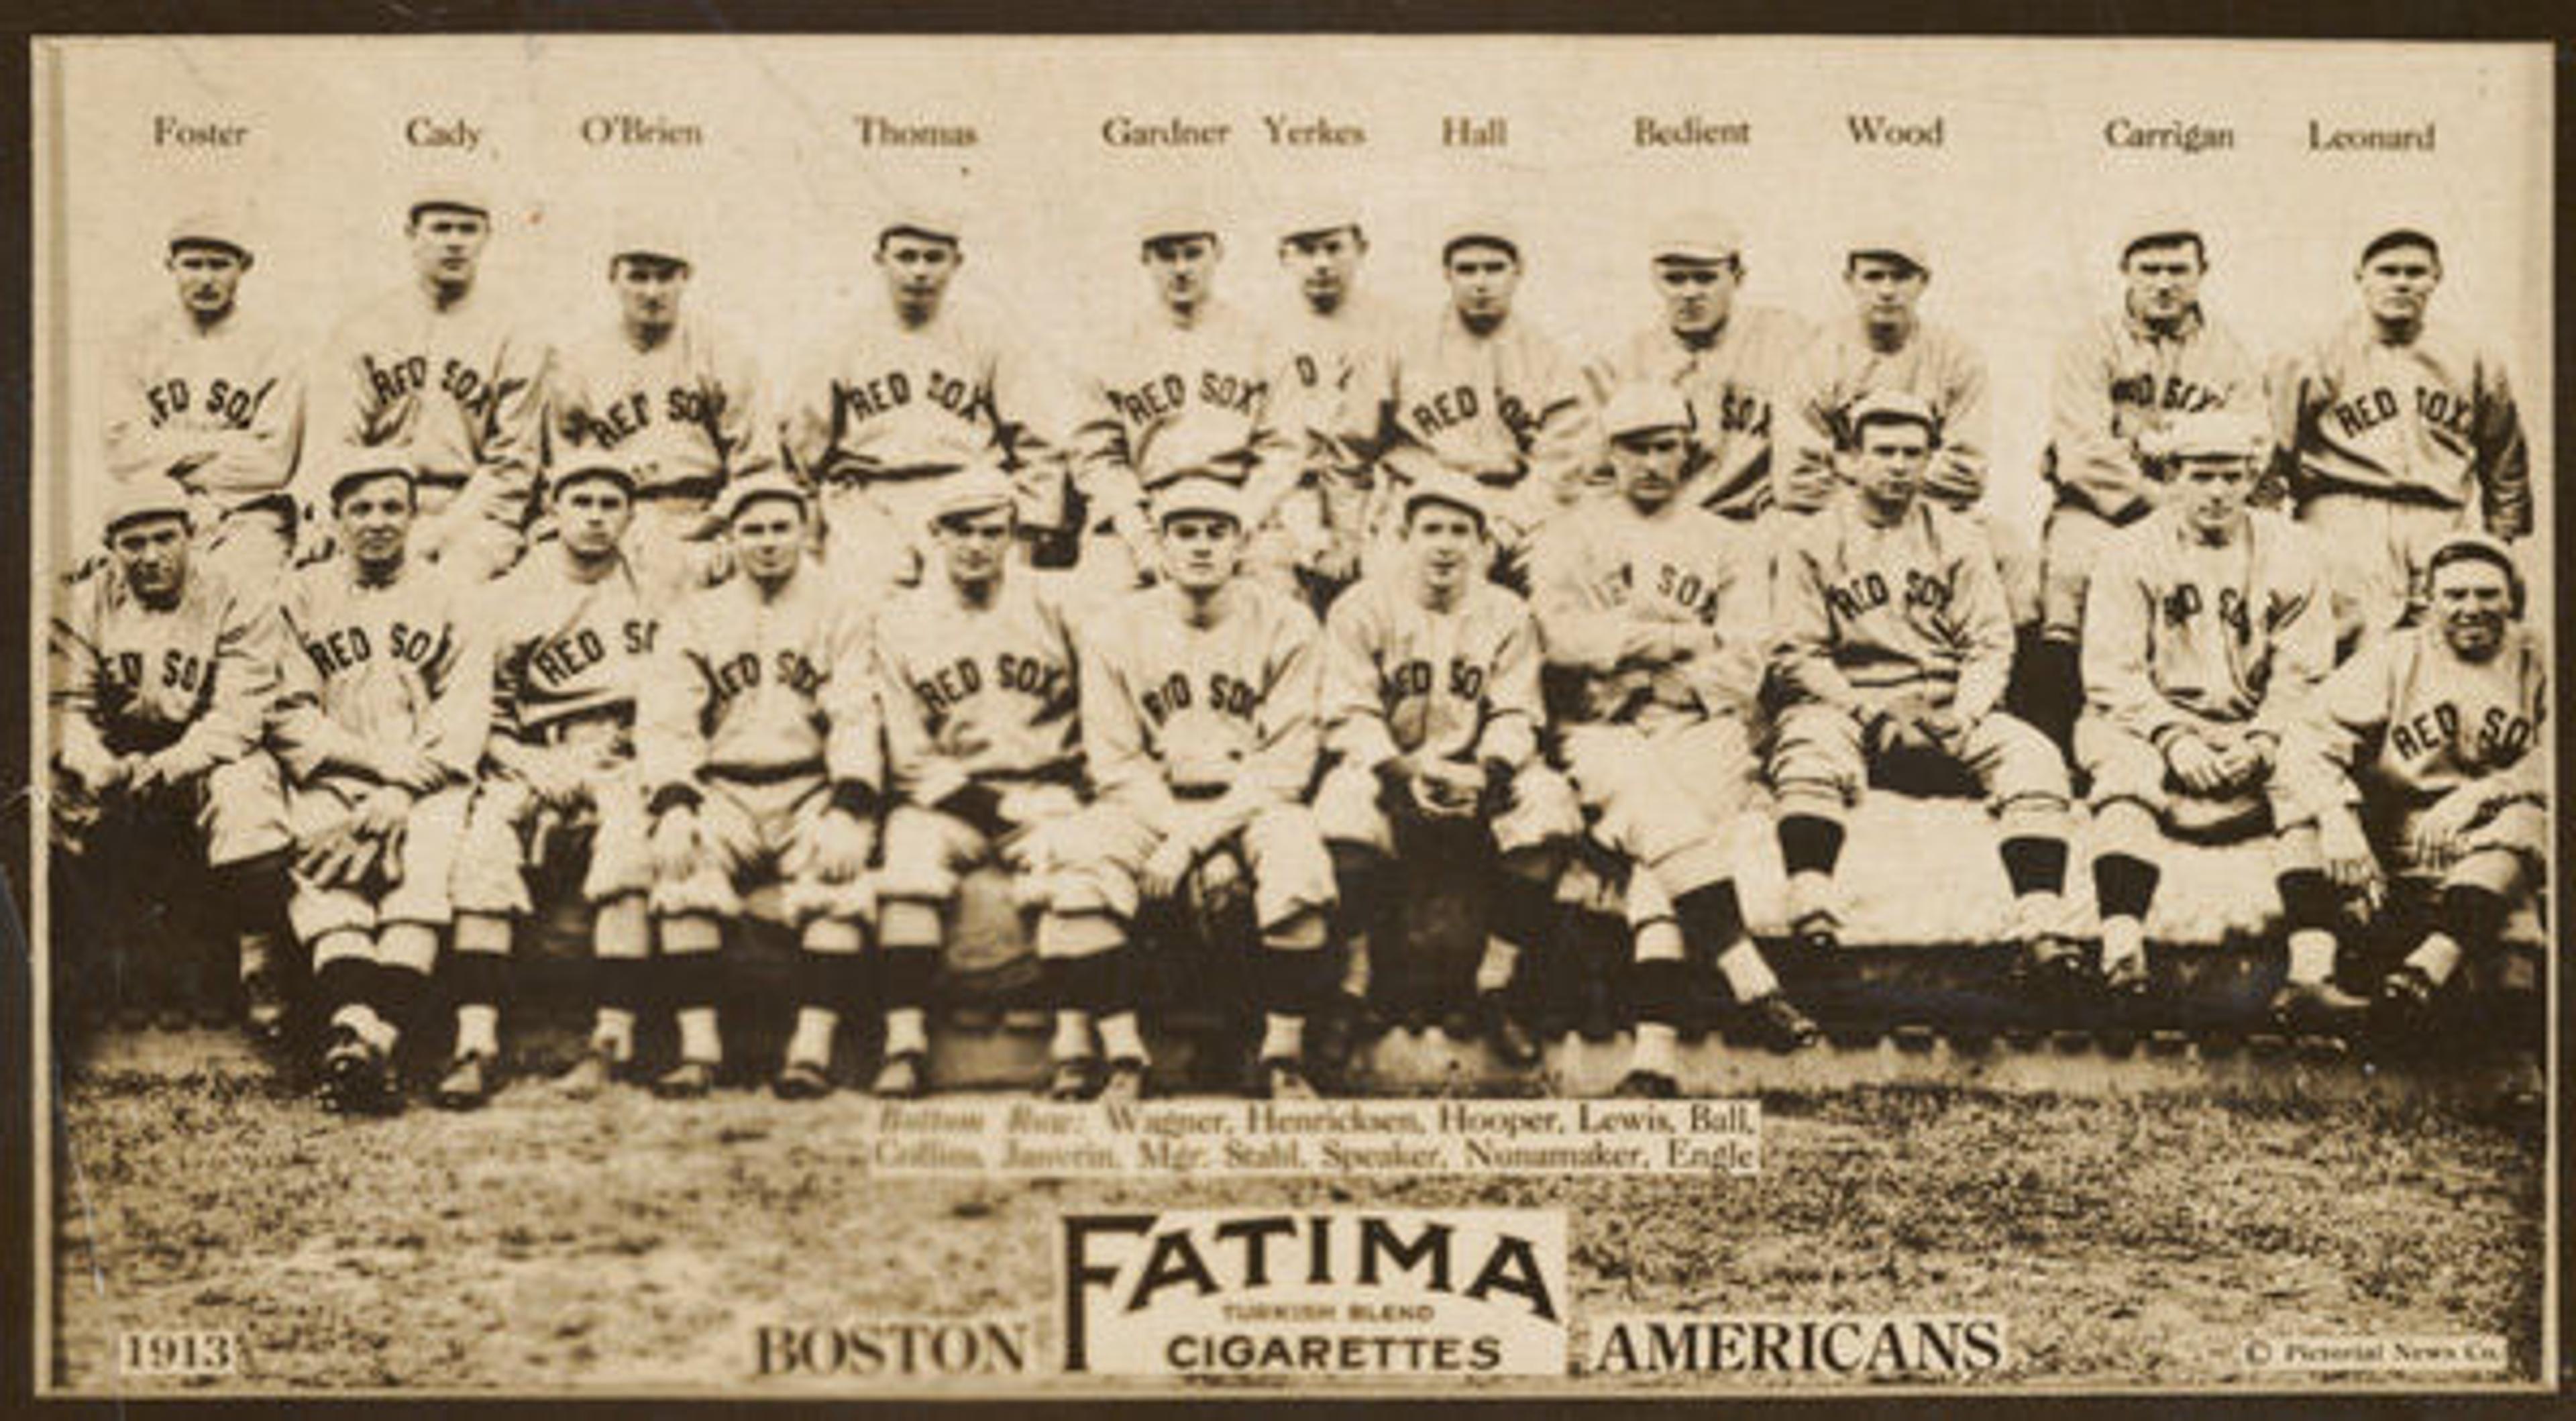 Liggett & Myers Tobacco Company (American, North Carolina). Boston Red Sox, American League, from the Baseball Team series (T200), issued by Liggett & Myers Tobacco Company to promote Fatima Turkish Blend Cigarettes, 1913. Photograph; sheet: 2 11/16 x 4 3/4 in. (6.9 x 12.1 cm). The Metropolitan Museum of Art, New York, The Jefferson R. Burdick Collection, Gift of Jefferson R. Burdick (63.350.246.200.1). Photographic copyright, The Pictorial News Co.